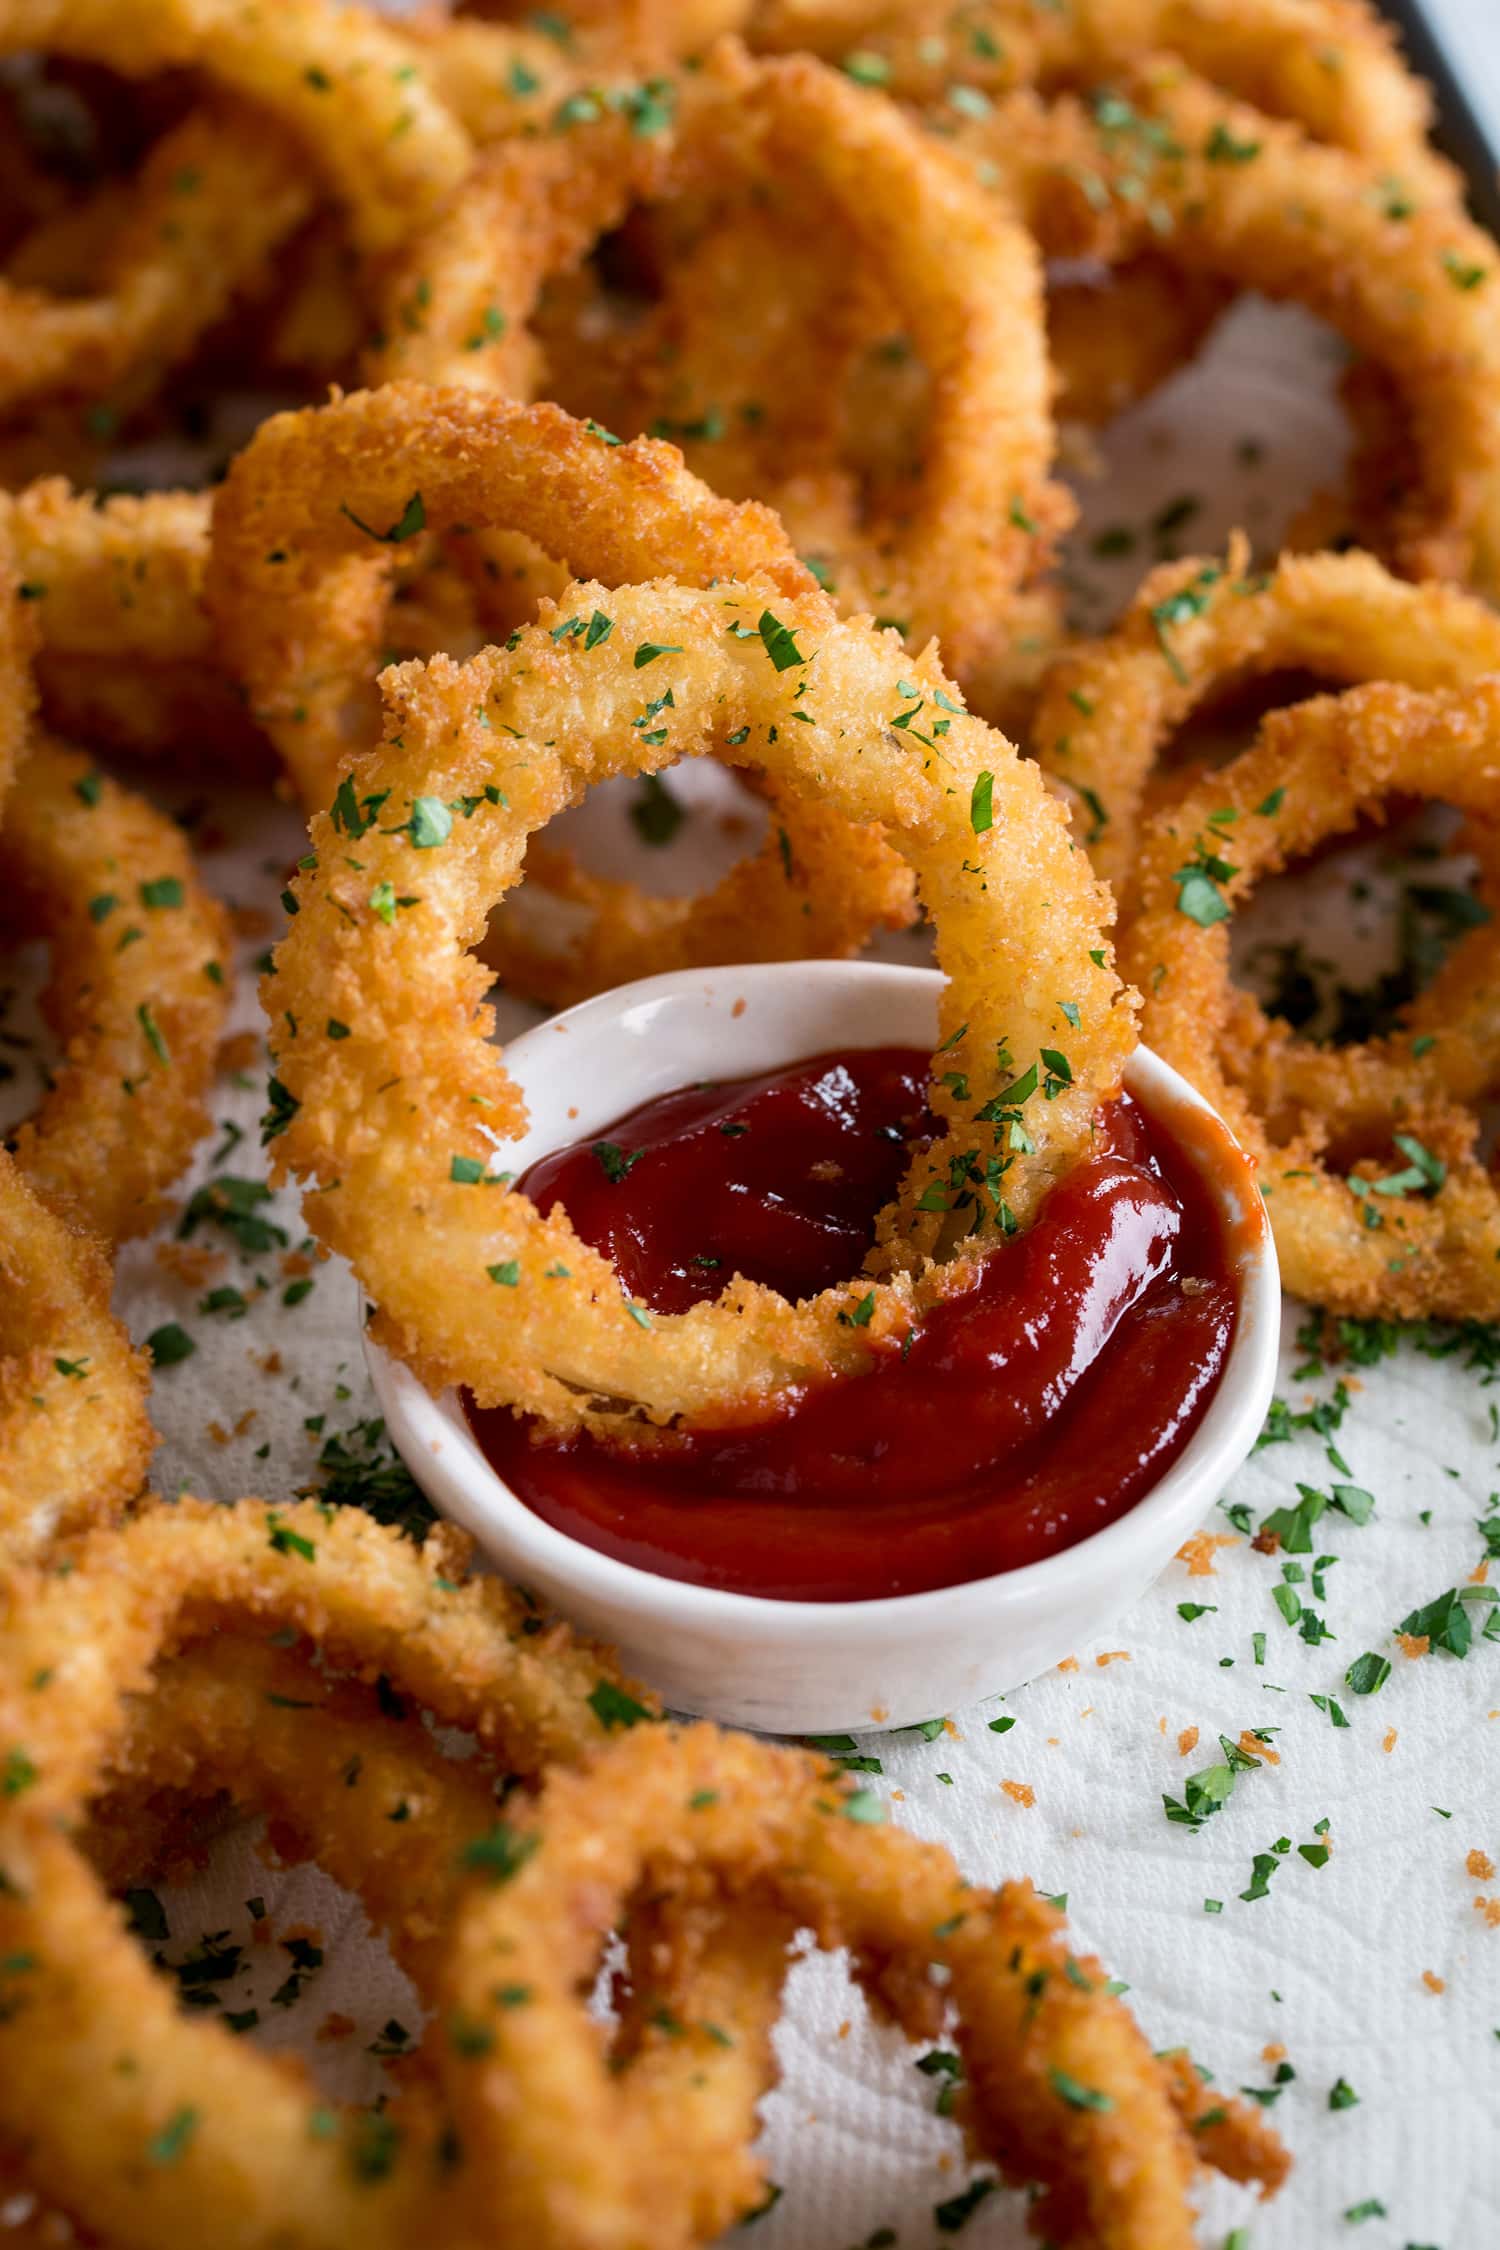 Homemade onion rings shown dipped in ketchup.